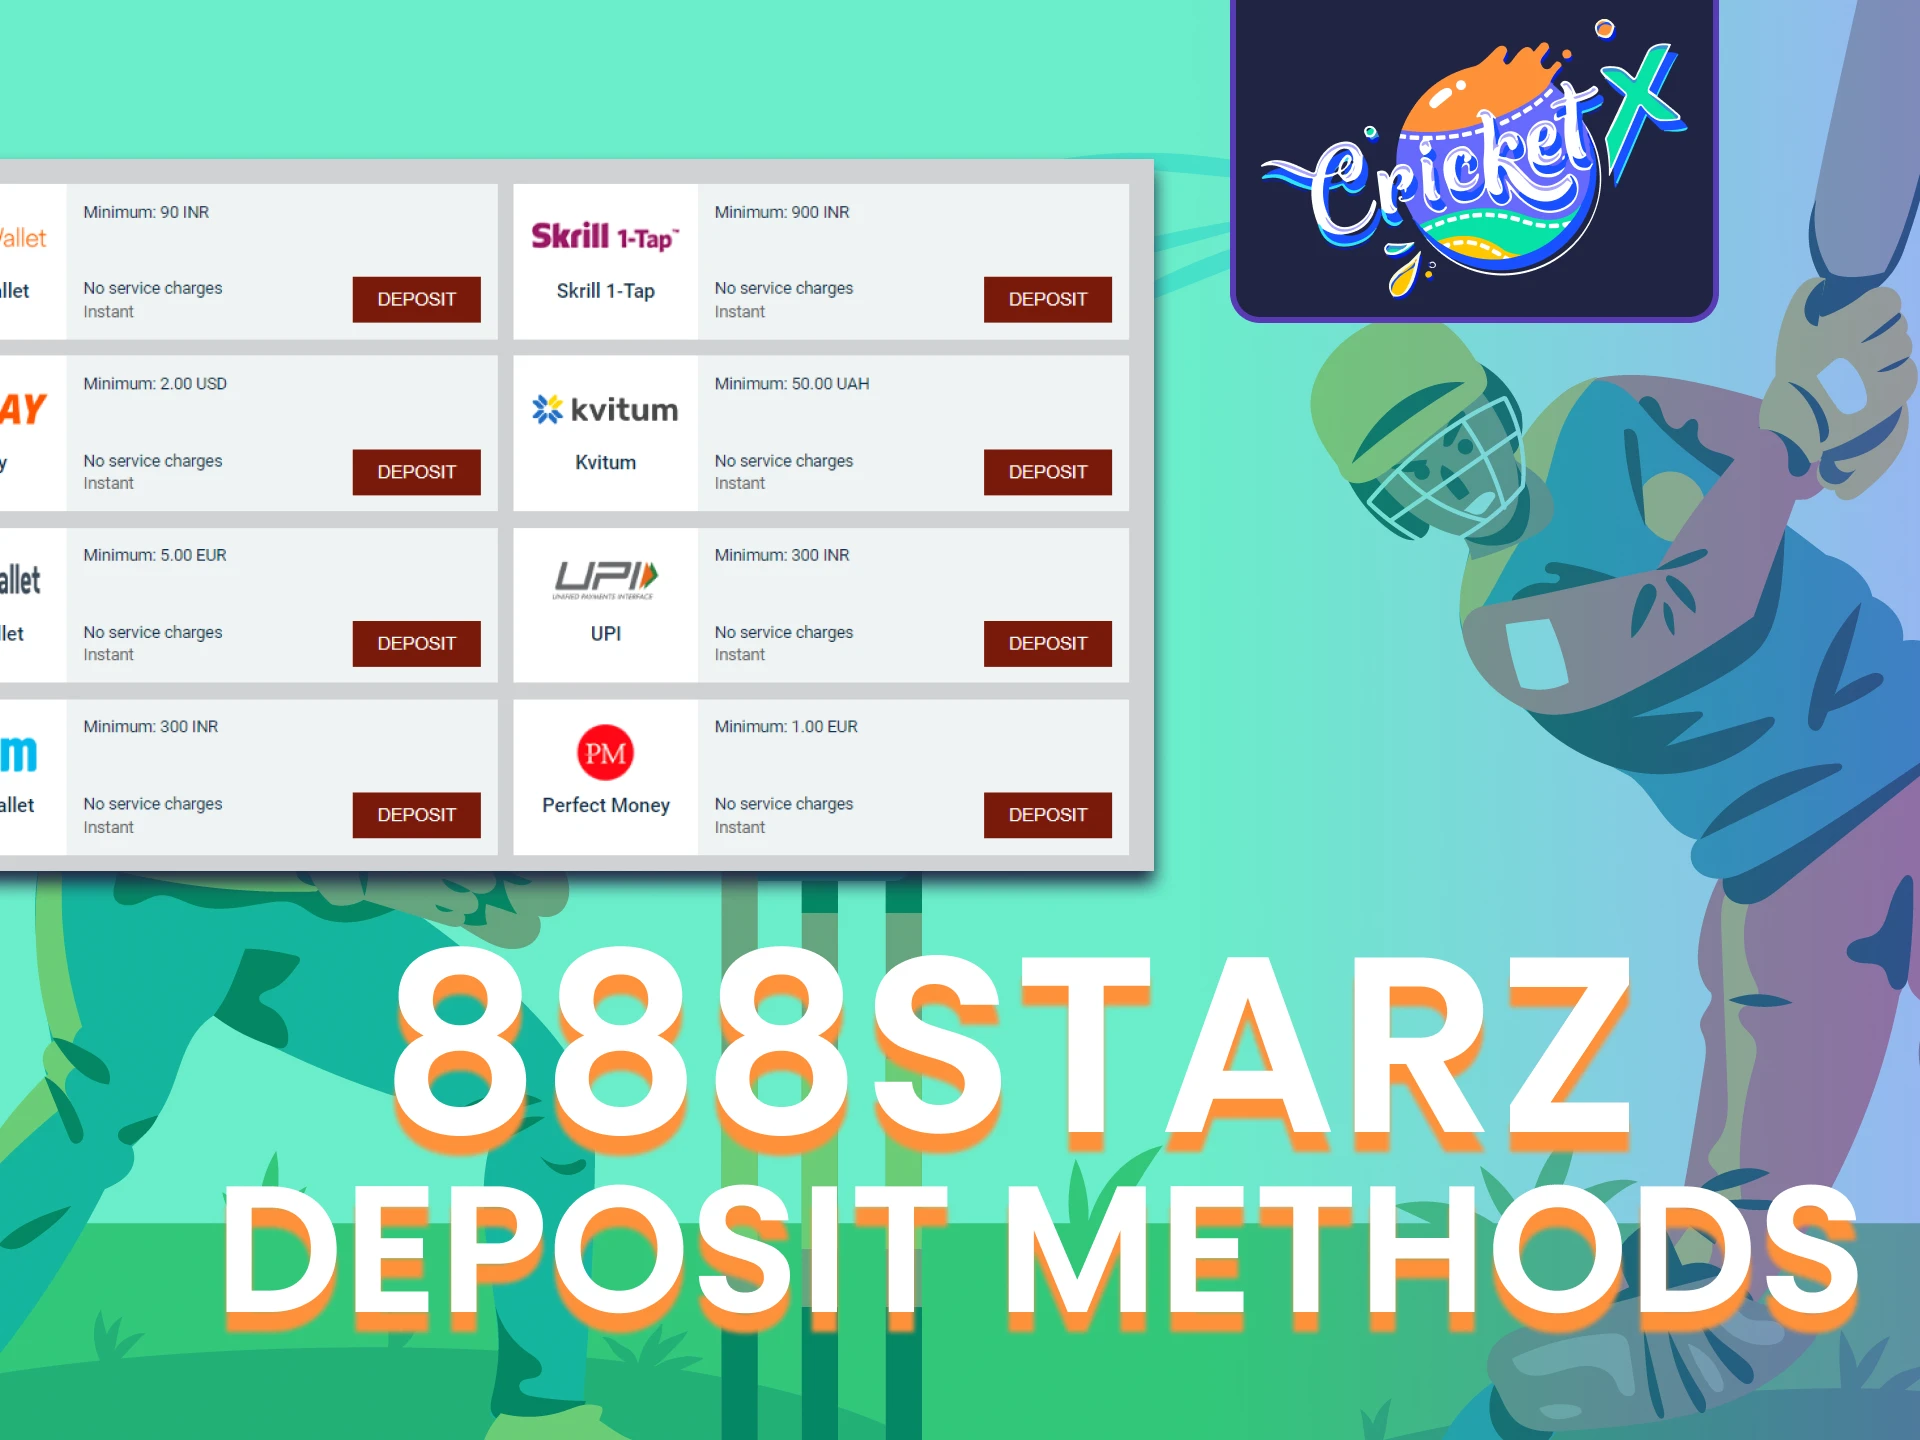 We will tell you how to top up your deposit on the 888starz service.